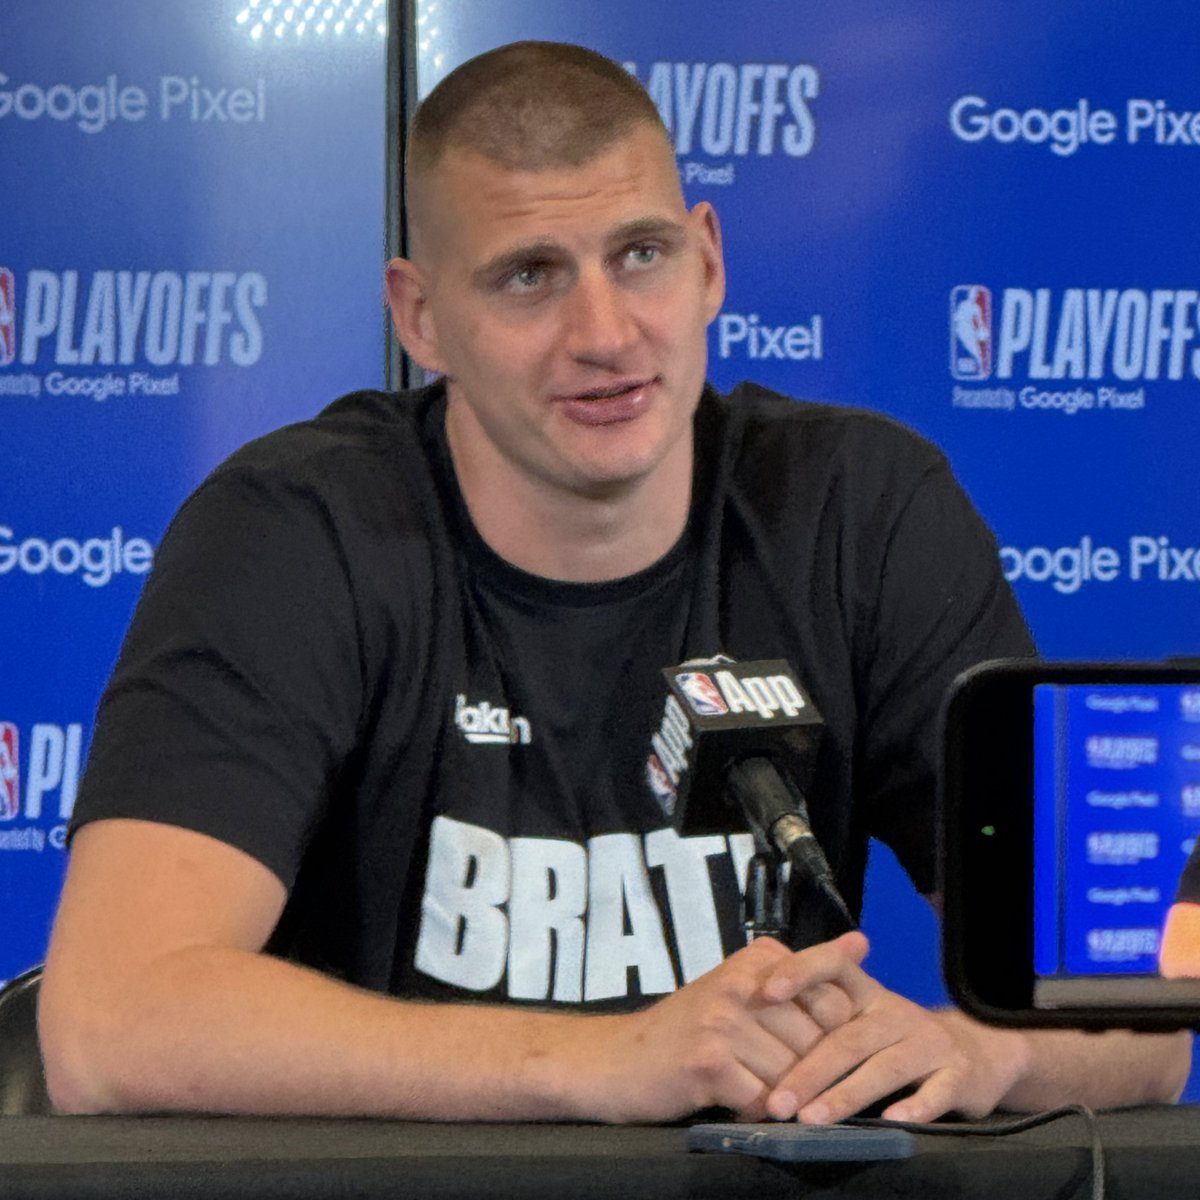 Nikola Jokic after winning MVP: “To be honest, I liked last year when I didn’t win it and we won a championship much better.”